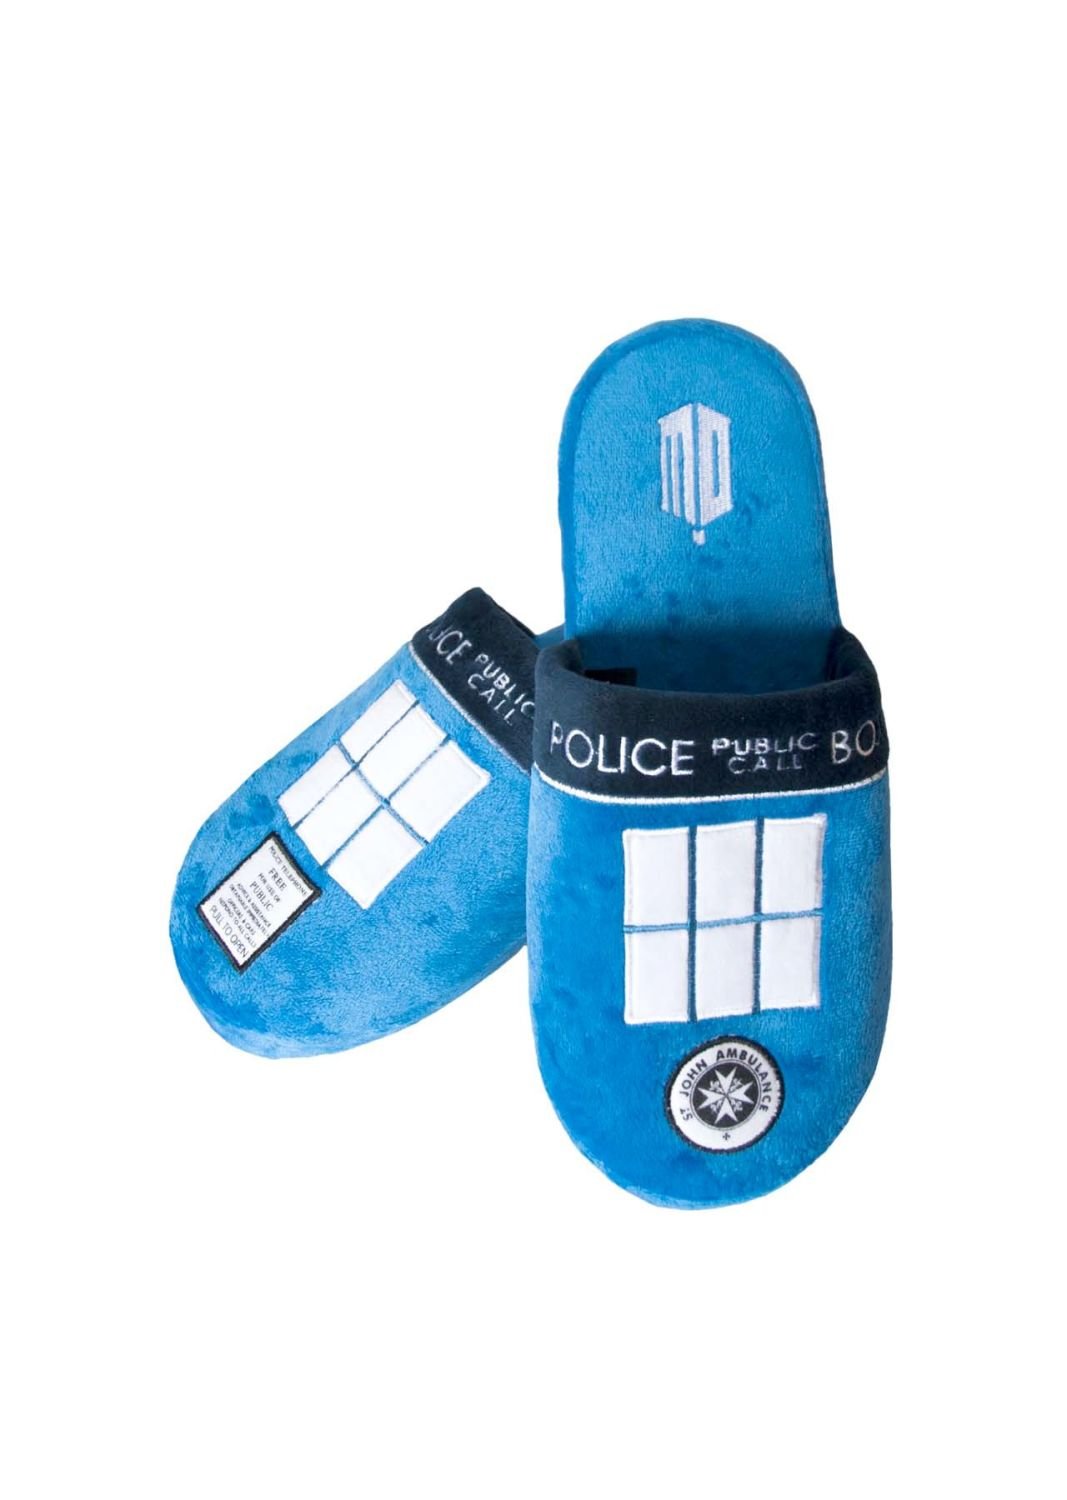 Dr Who Tardis Slippers for Men Size 8 -10